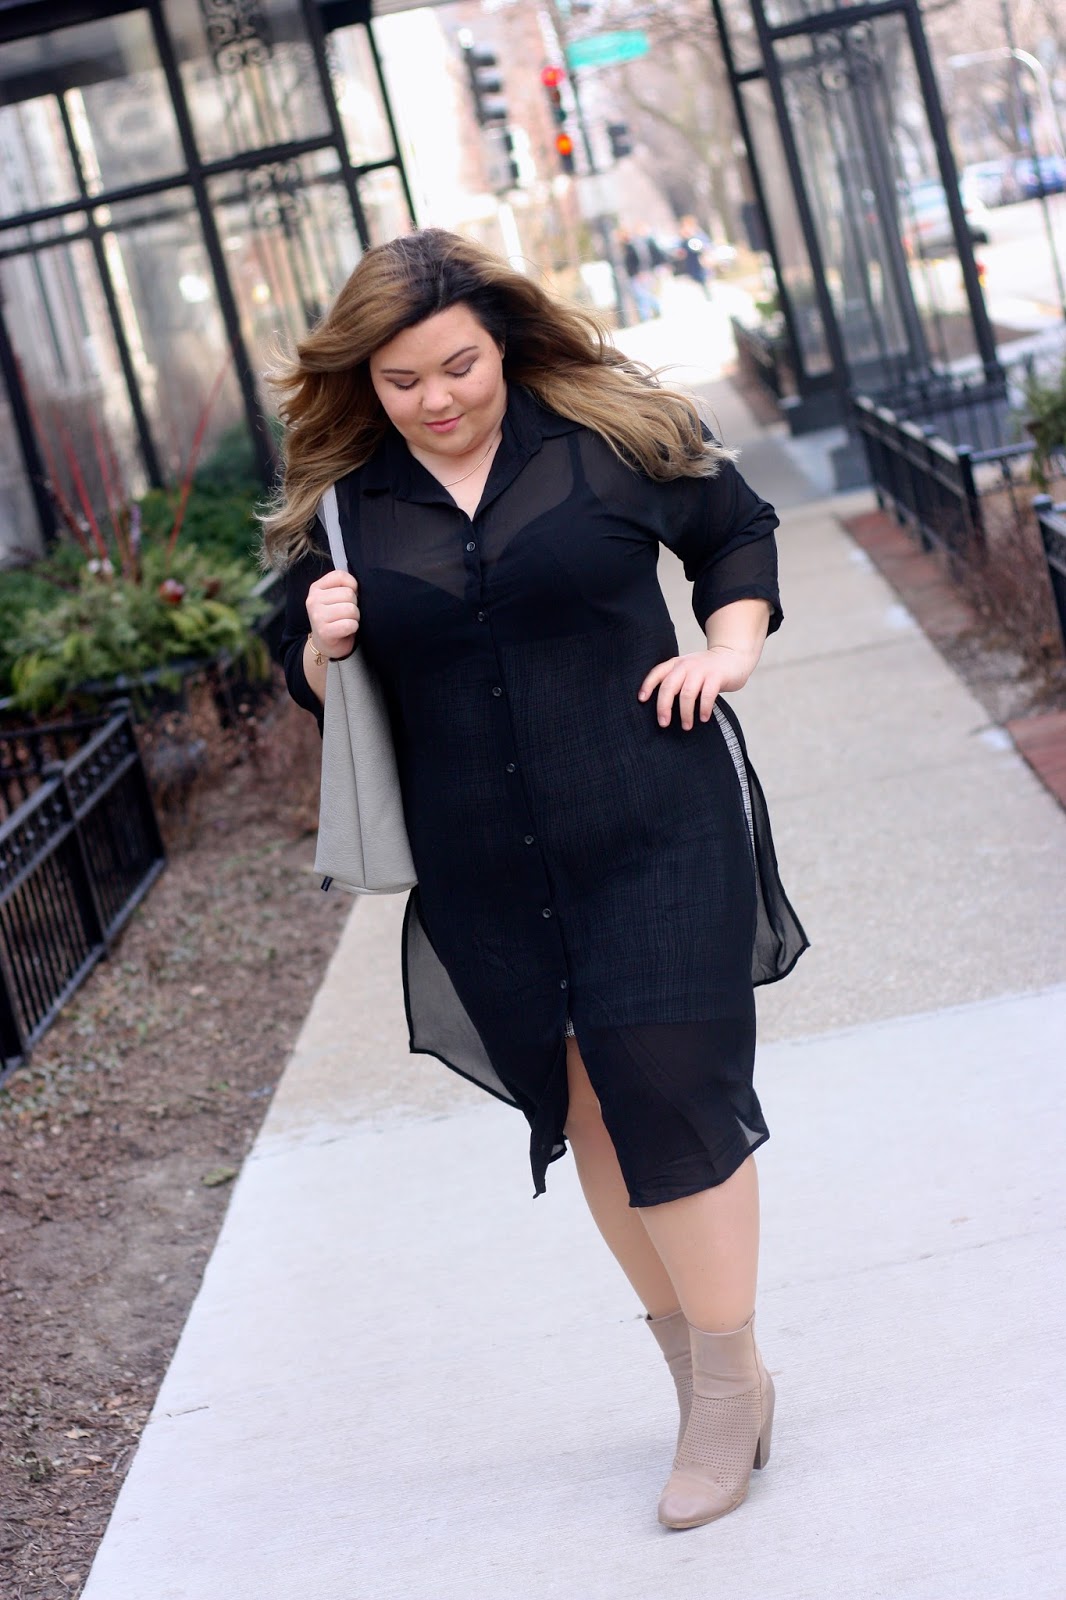 ANKLE BOOTS WITH PLUS SIZE LEGGINGS - Natalie in the City